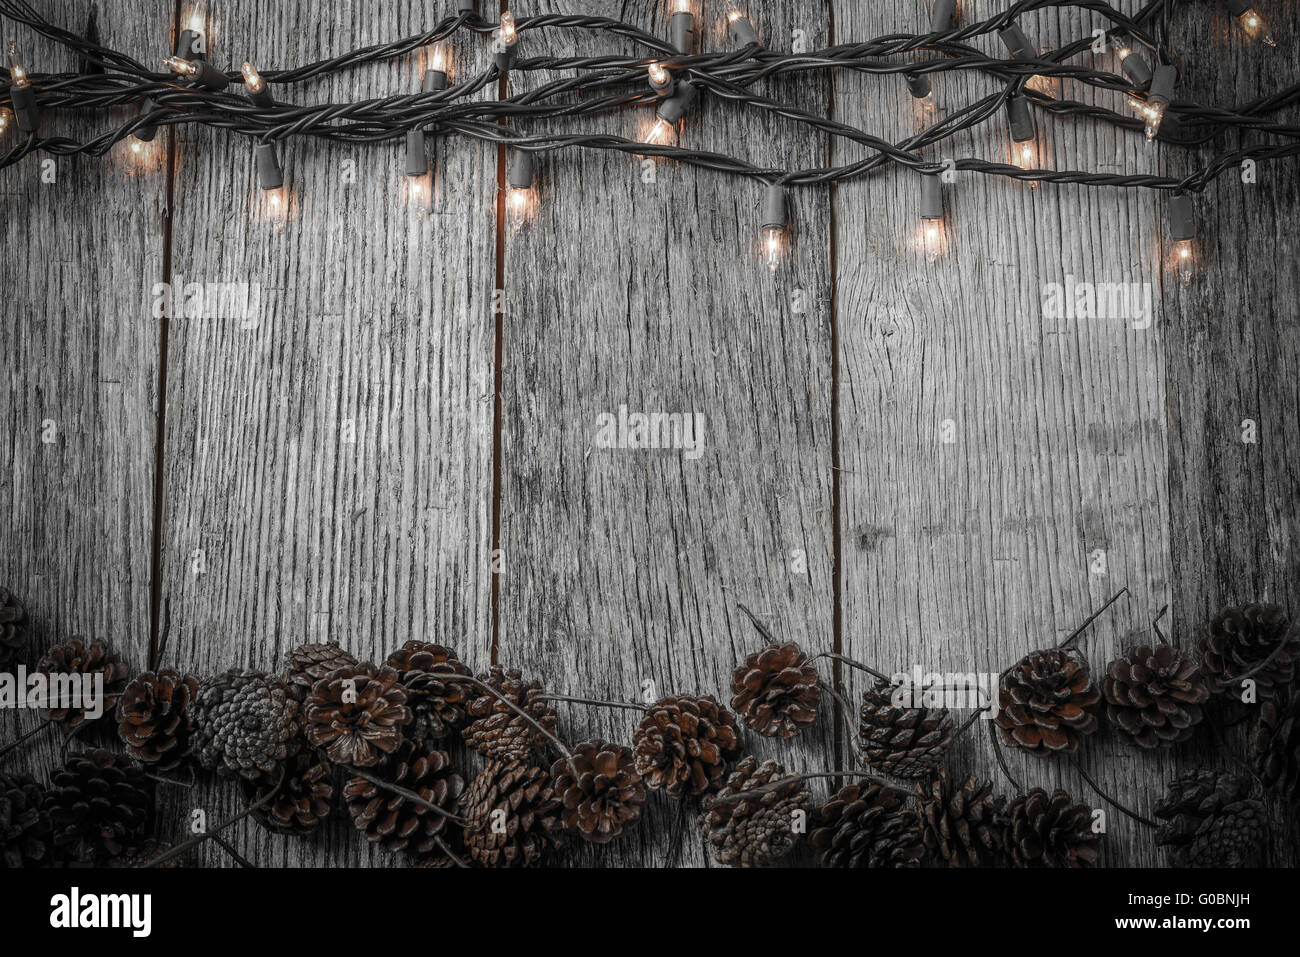 Christmas Lights and Pine cones on Rustic Wood Background Stock Photo